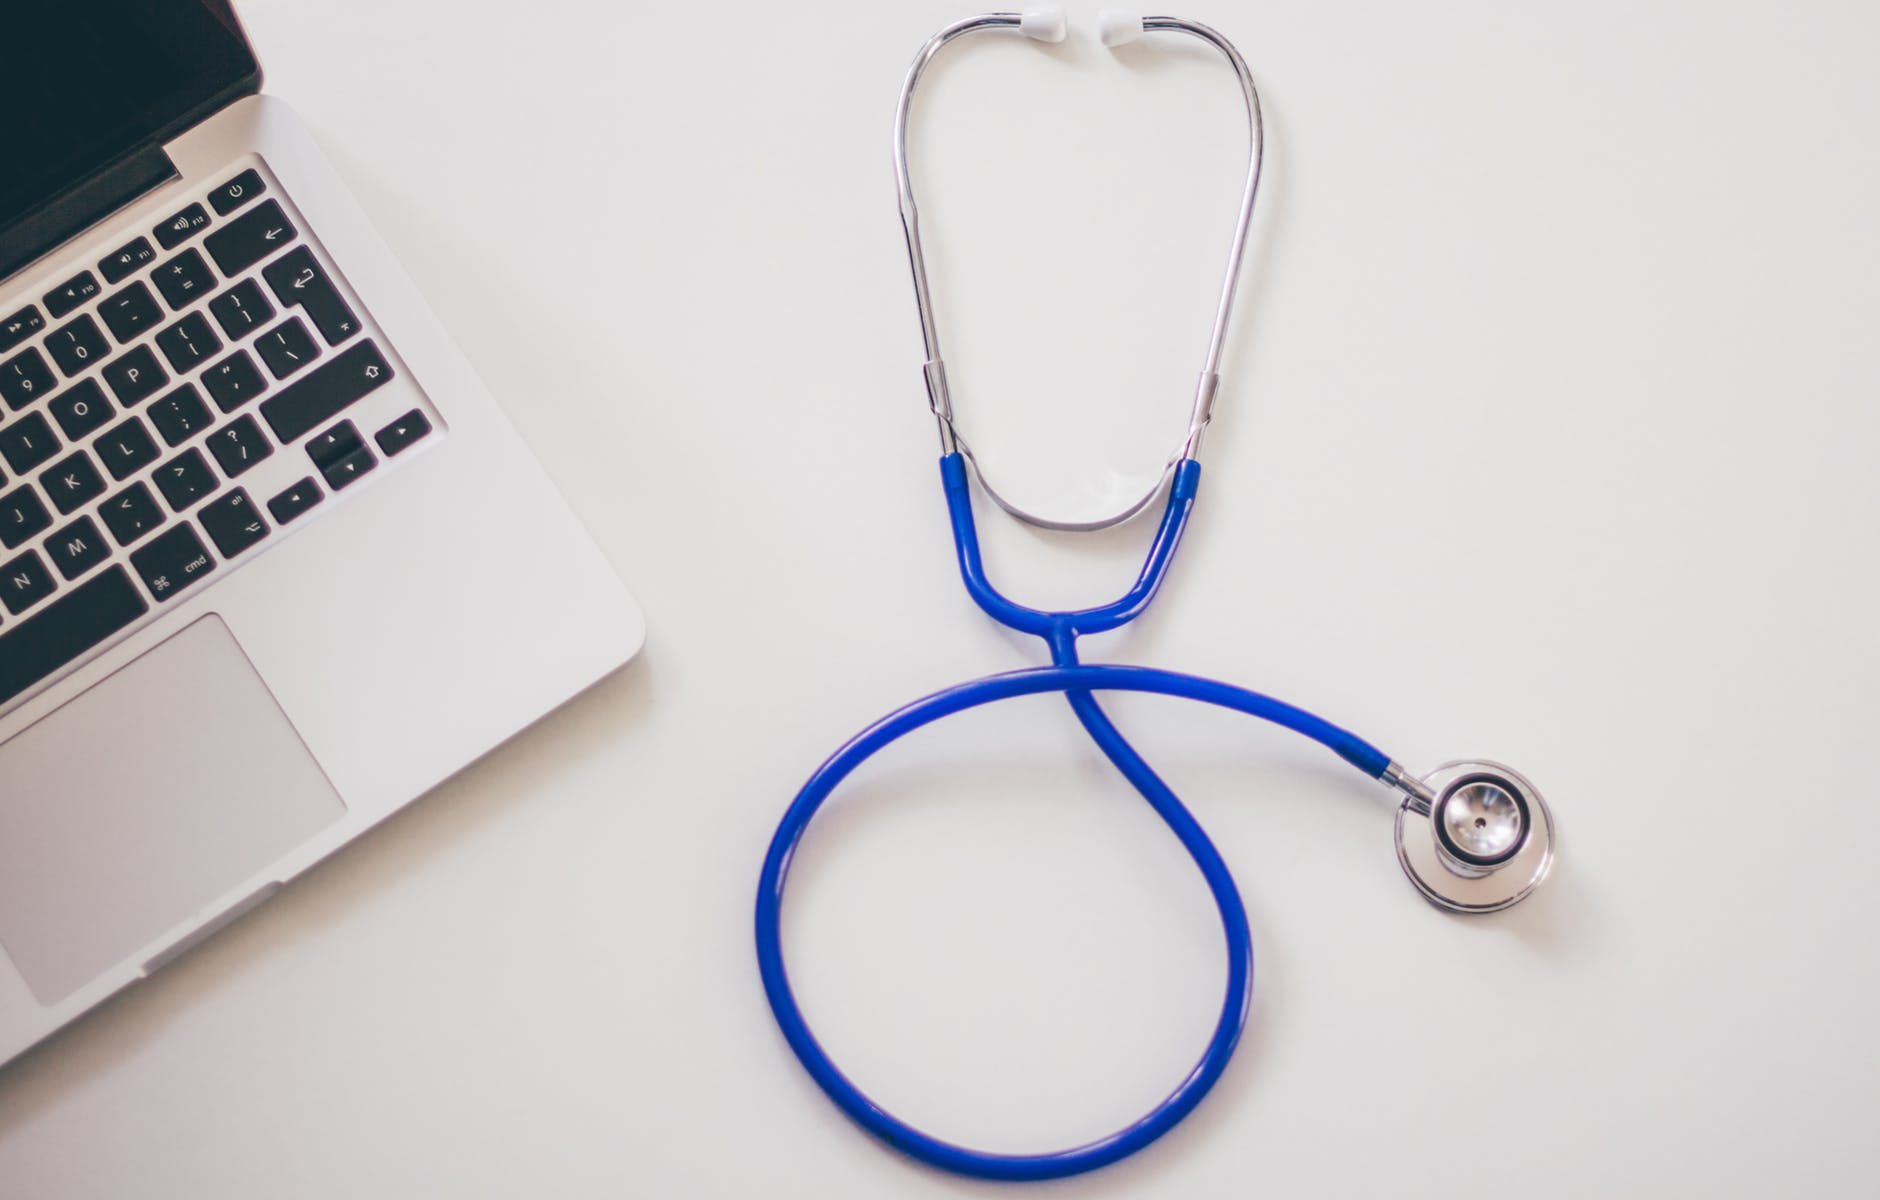 The Top 4 Risks and Limitations of EHR Software in 2020